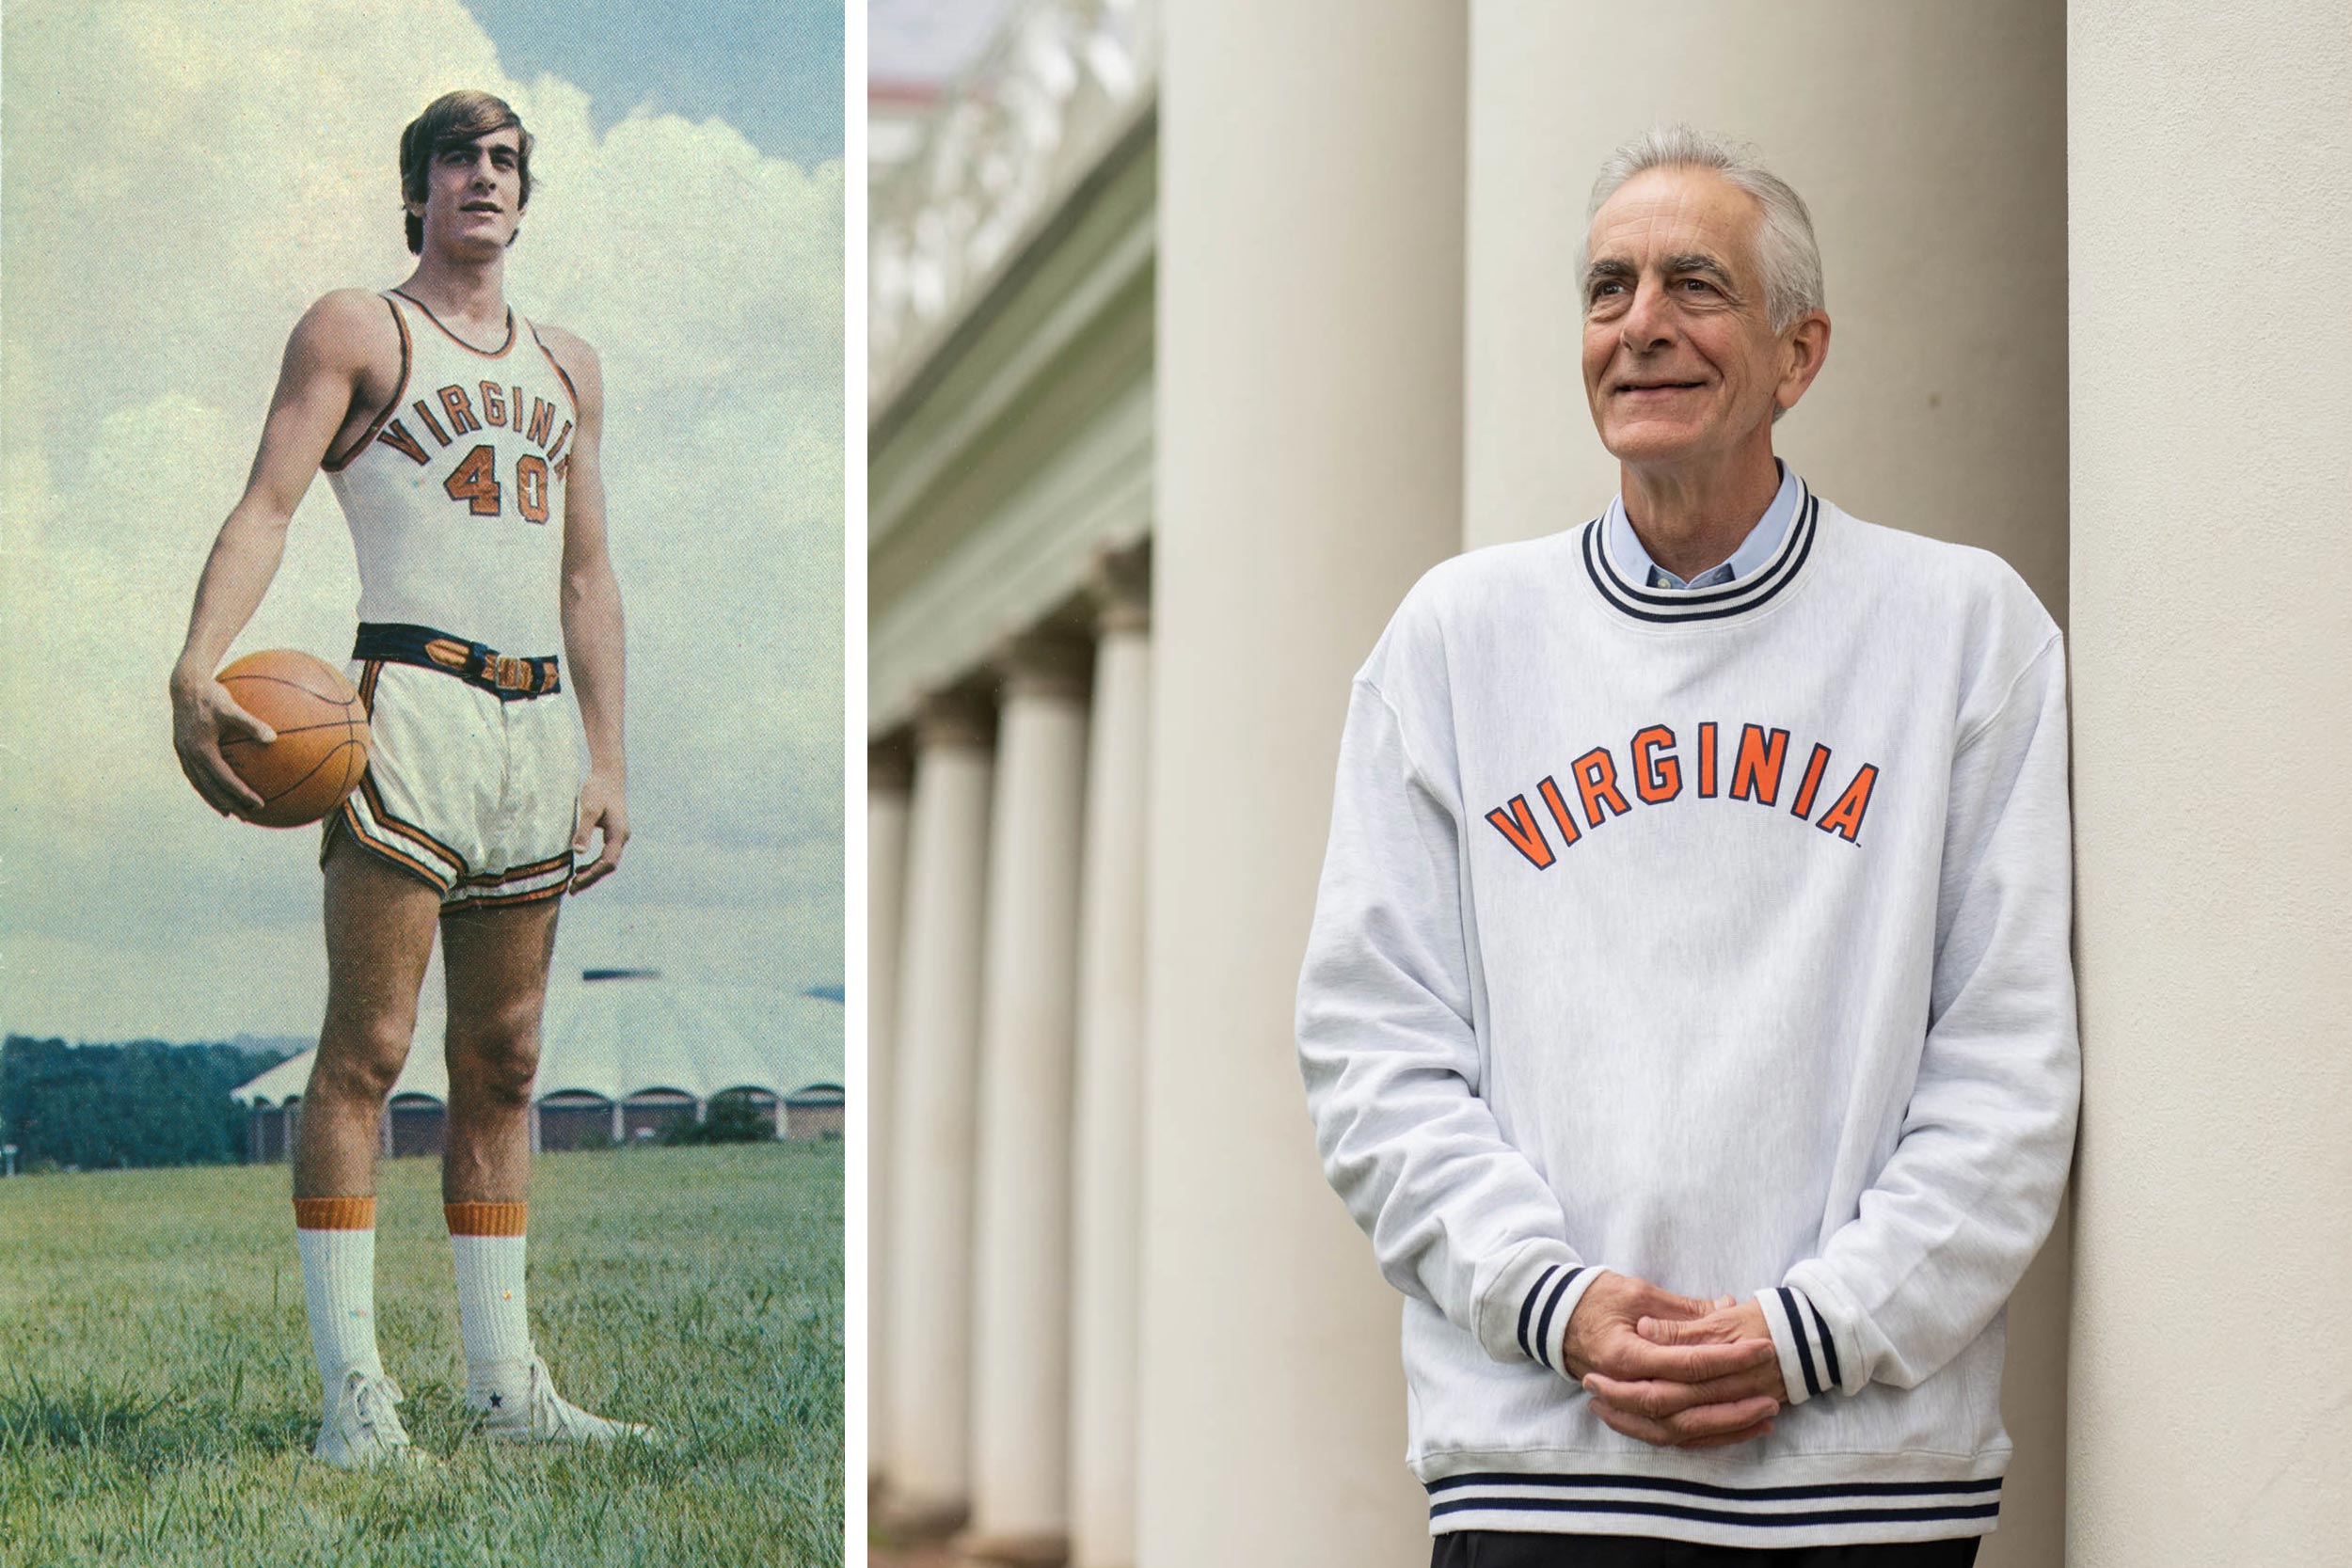 Barry Parkhill in his UVA basketball uniform, left, and Barry Parkhill now in the vintage sweatshirt, right